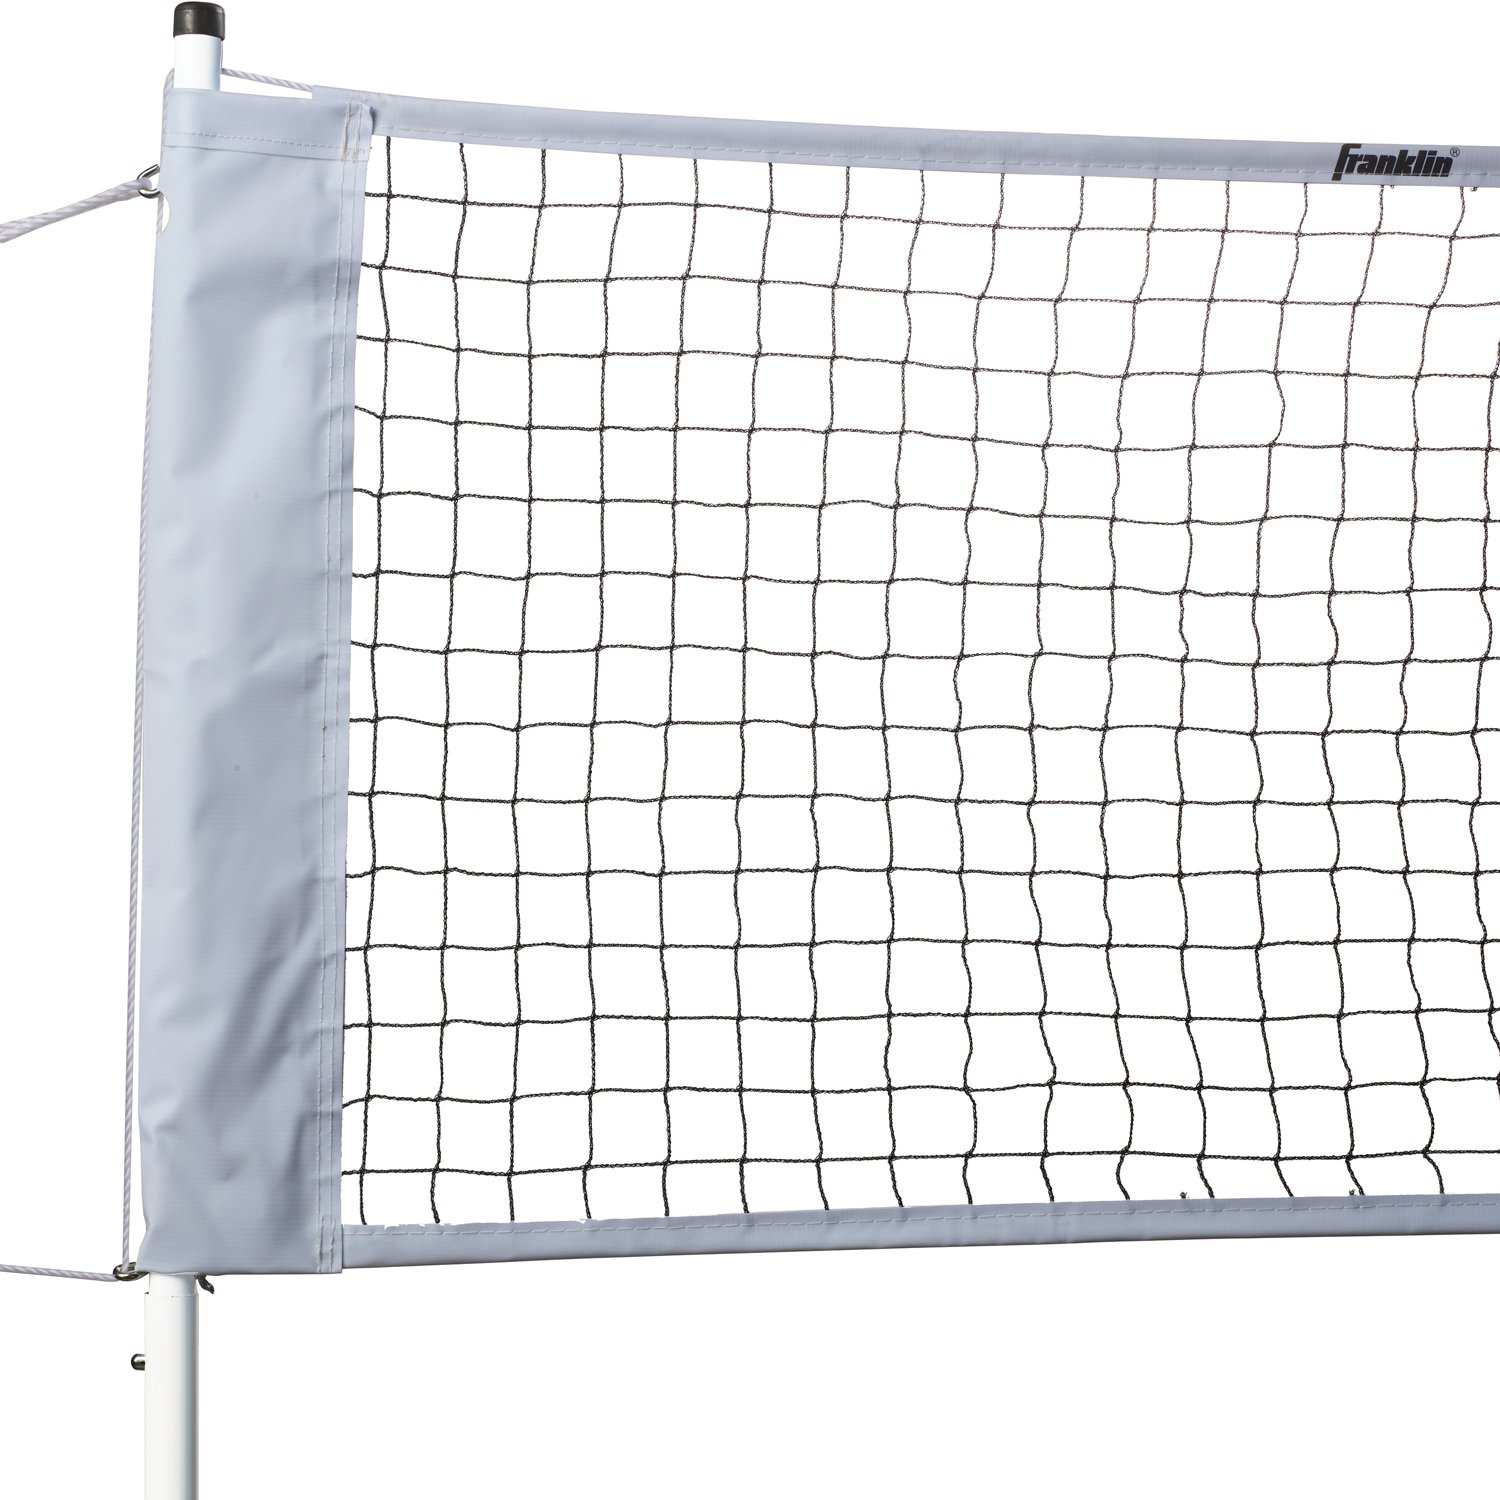 Franklin 30 ft x 2 ft Volleyball and Badminton Replacement Net | Academy